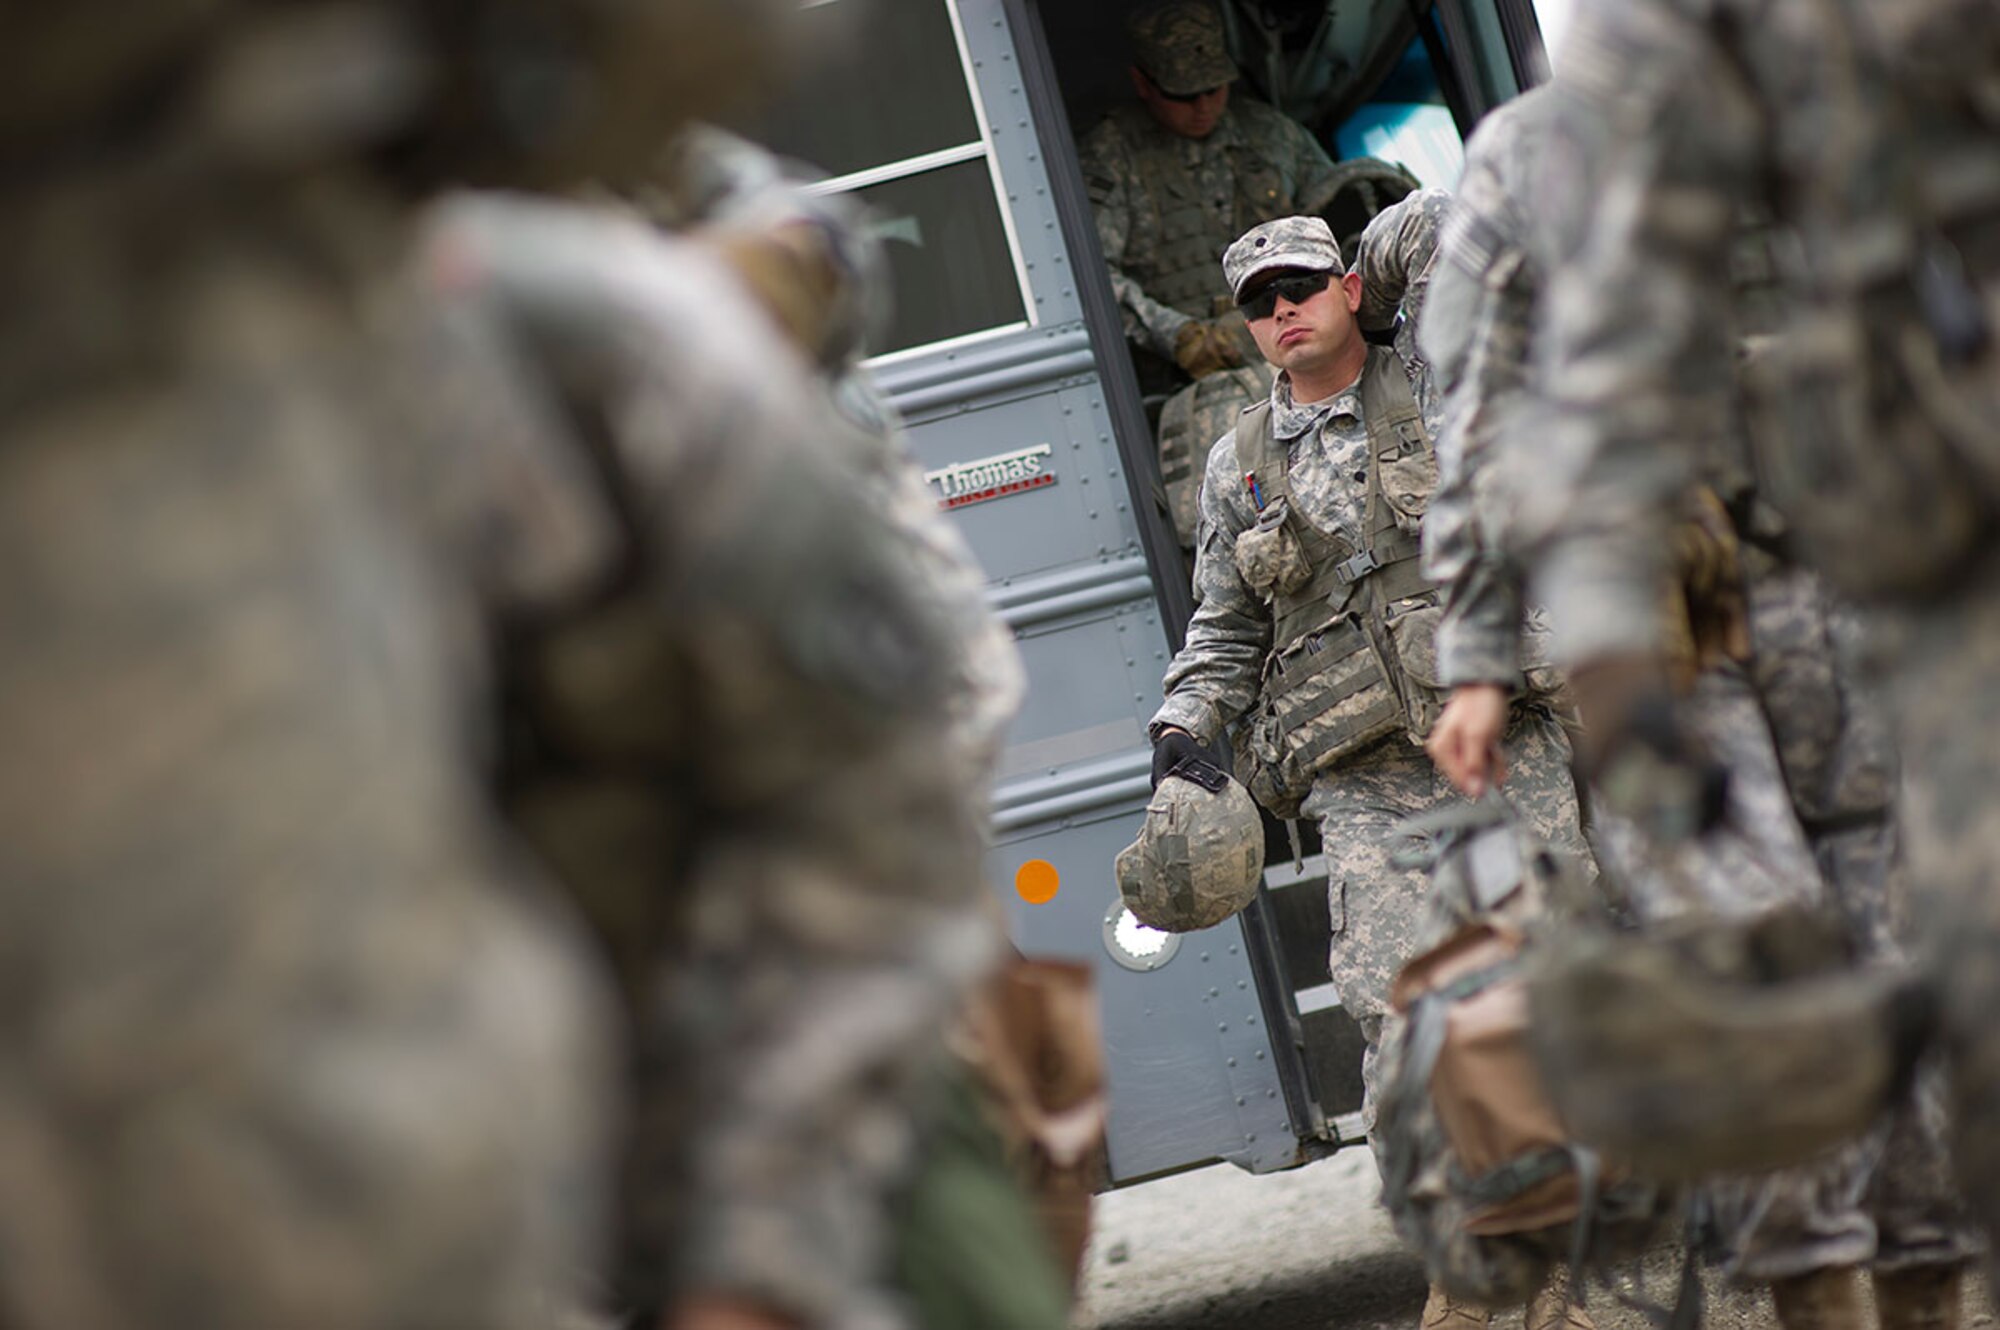 Spc. Kyle Navarre, a native of Detroit, assigned to Alpha Troop, 1st Squadron (Airborne), 40th Cavalry Regiment, 4th Infantry Brigade Combat Team (Airborne), 25th Infantry Division, U.S. Army Alaska, steps off a bus as he arrives at a staging area with fellow Soldiers during Expert Infantryman Badge qualification on Joint Base Elmendorf-Richardson, Tuesday, Sept. 9, 2014. The Expert Infantryman Badge was approved by the Secretary of War on October 7, 1943, and is currently awarded to U.S. Army personnel who hold infantry or special forces military occupational specialties and successfully pass the rigors of the course. (U.S. Air Force photo/Justin Connaher)